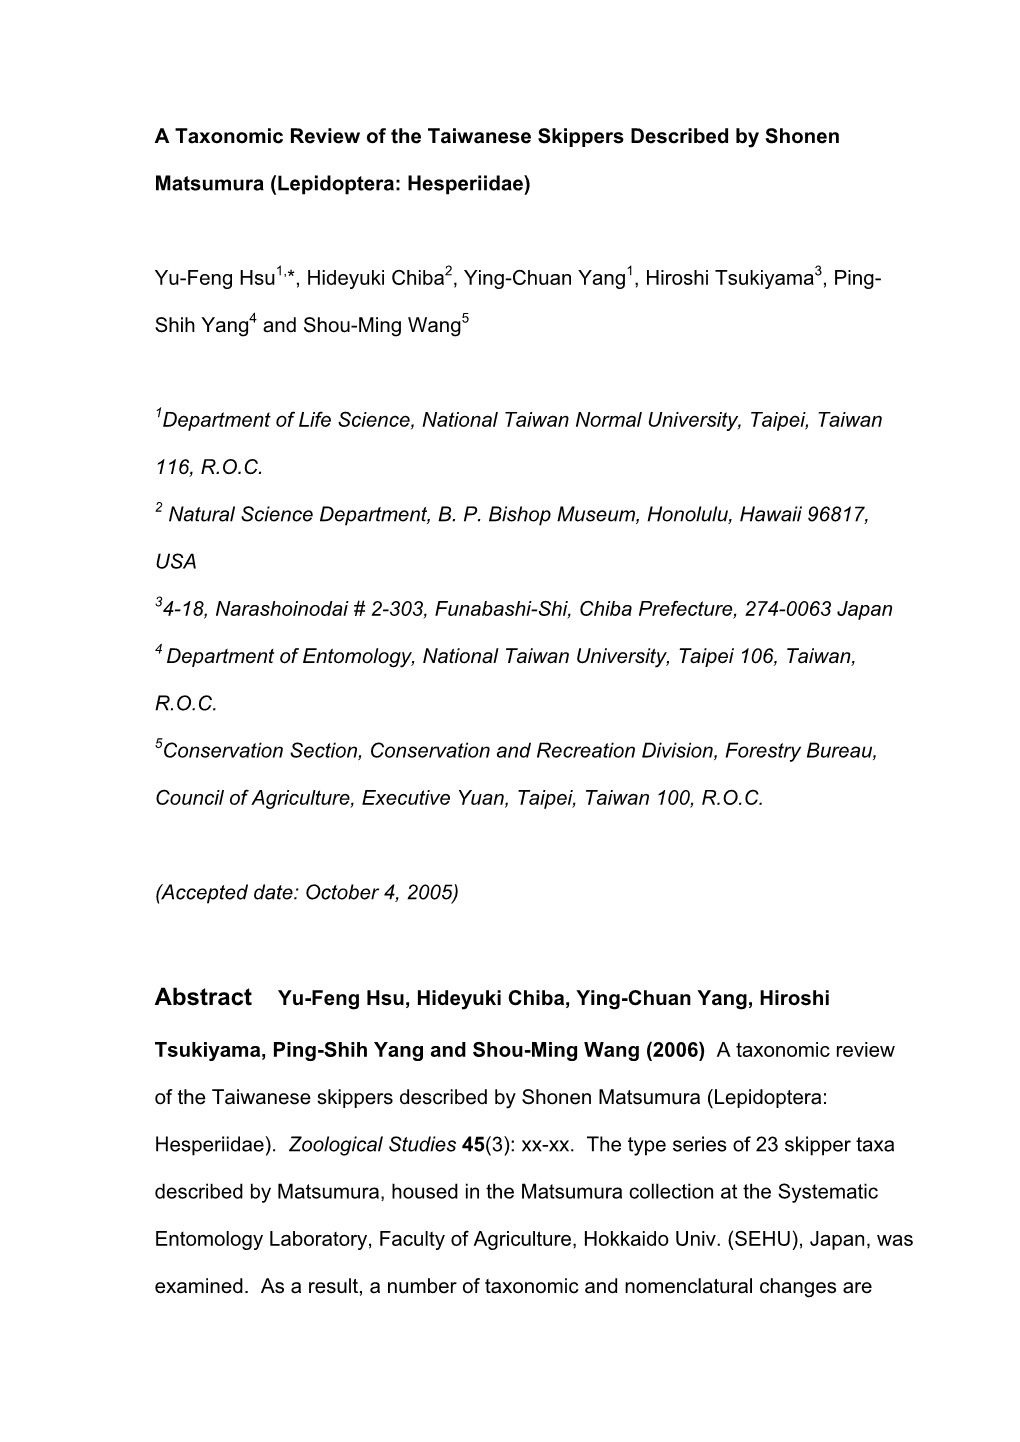 A Taxonomic Review of the Taiwanese Skippers Described by Shonen